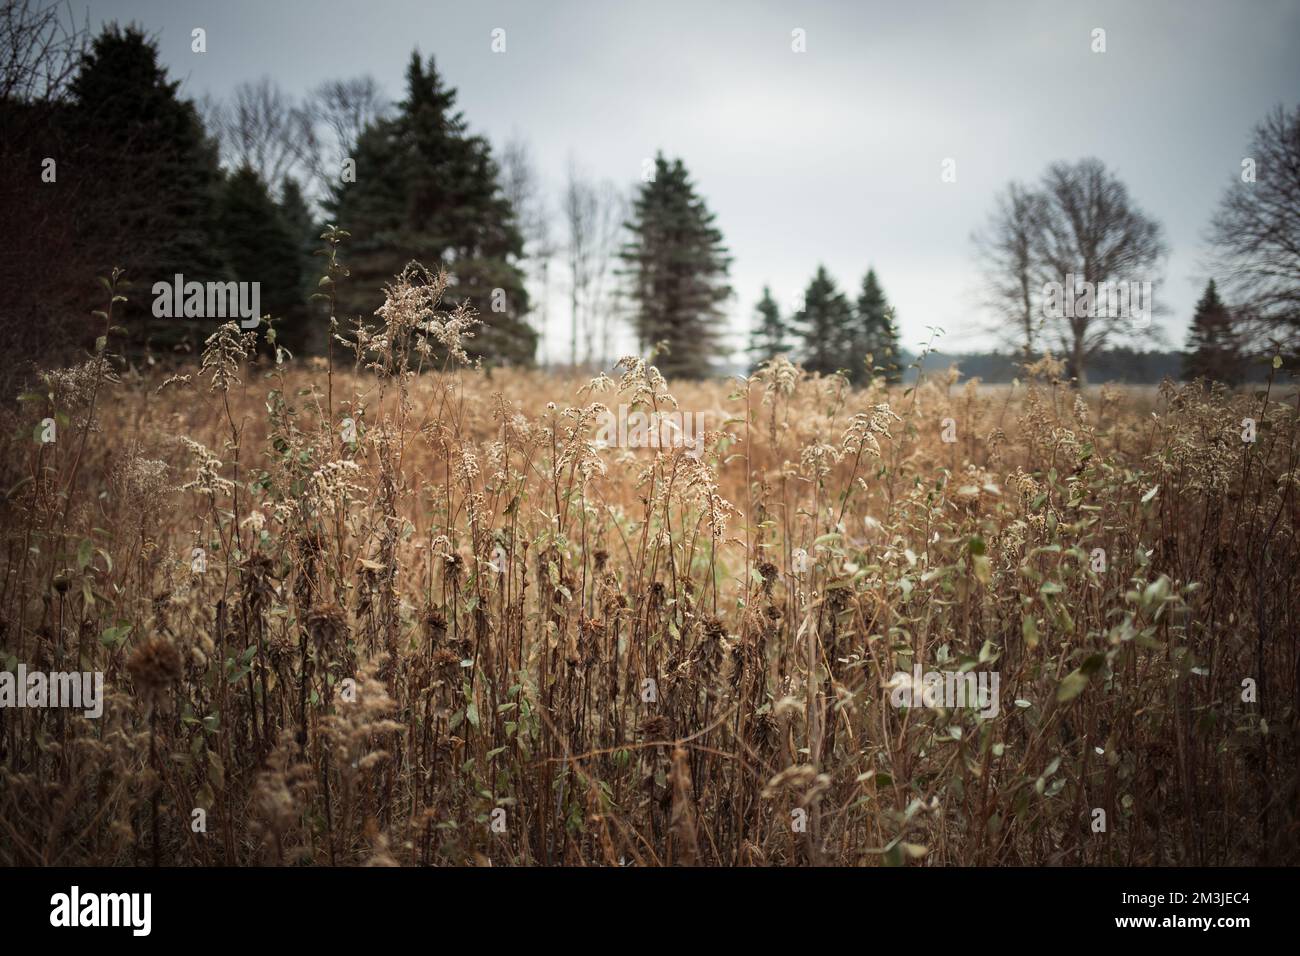 Gloomy field on a winter day Stock Photo